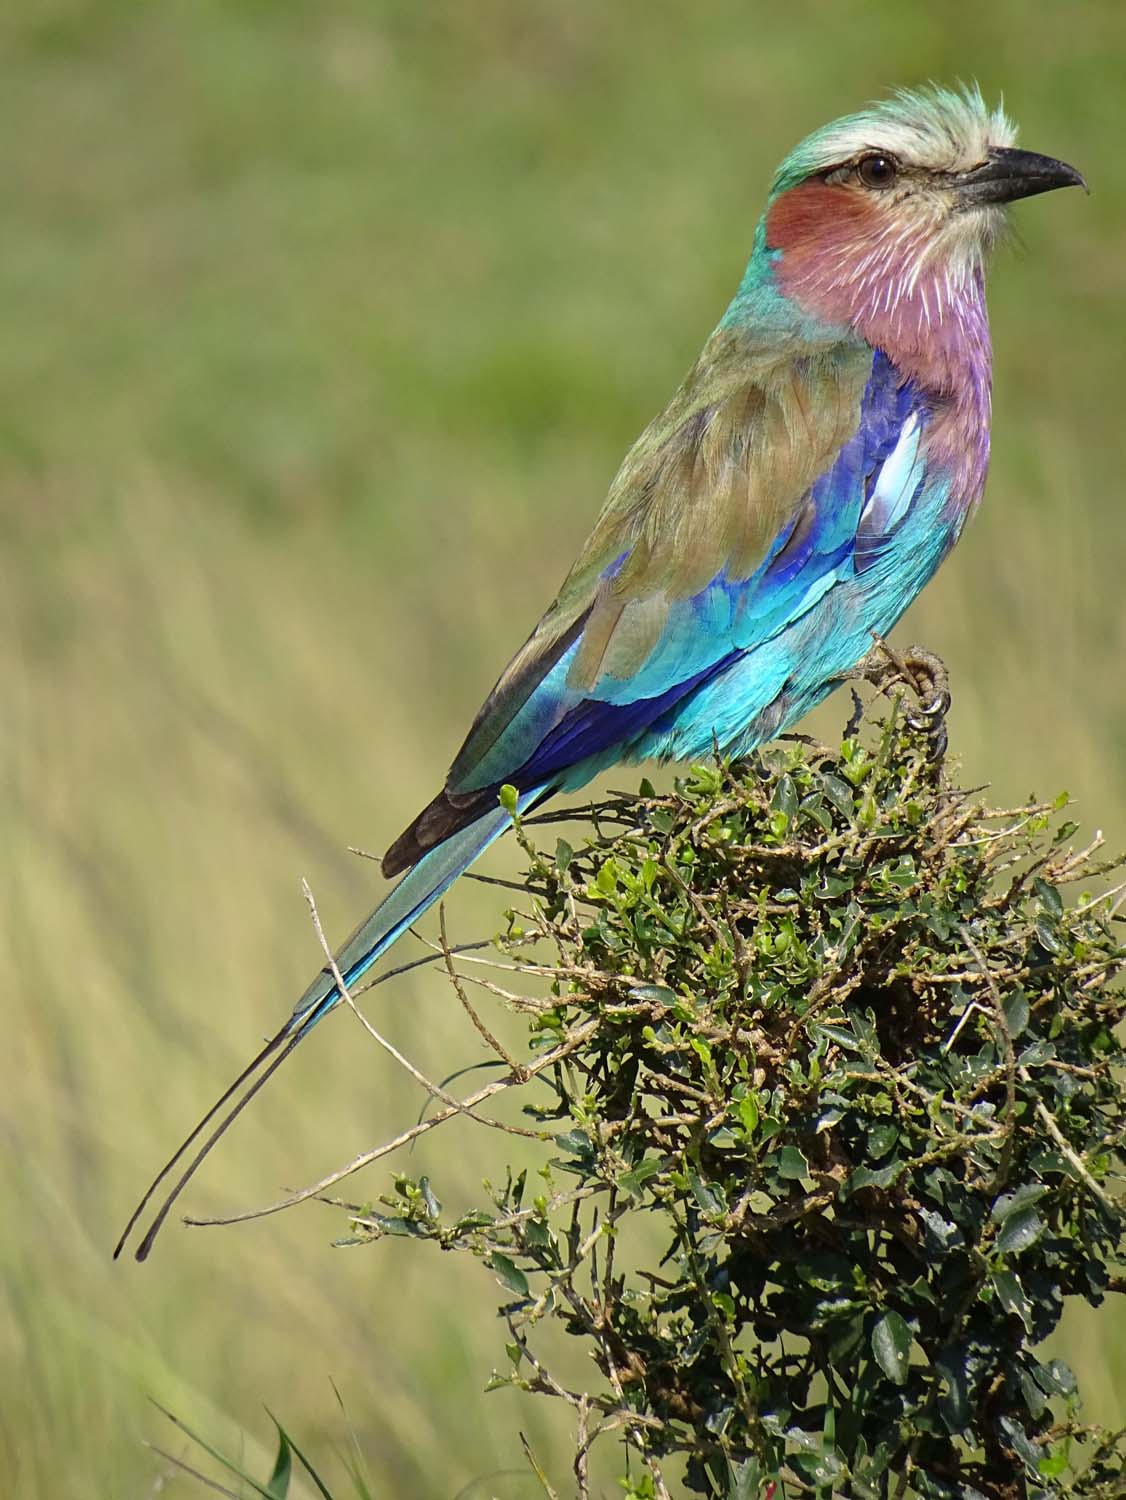 the beautiful national bird of Kenya: the lilac-breasted roller